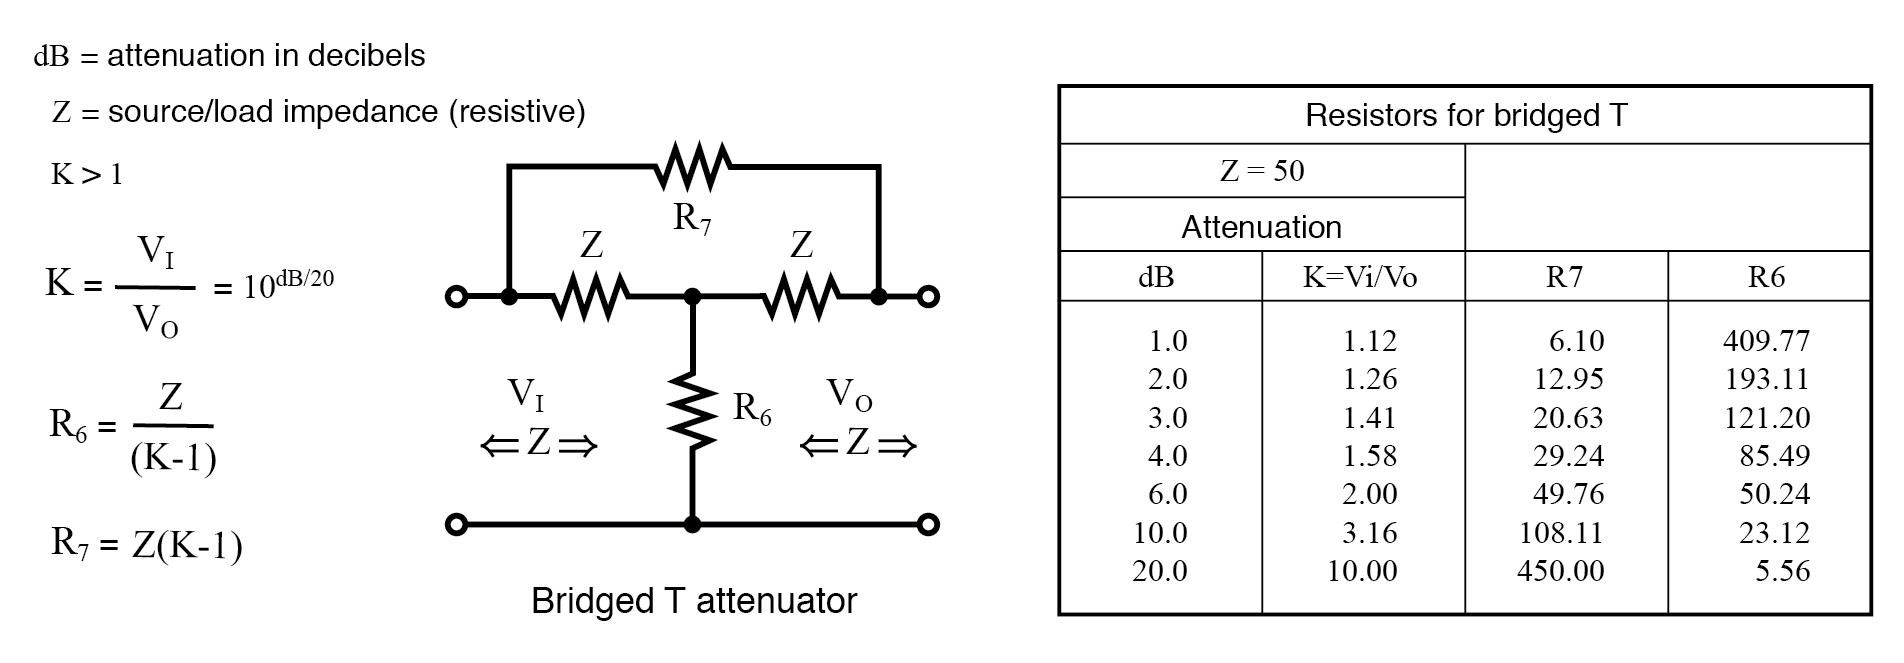 Formulas and abbreviated table for bridged-T attenuator section, Z = 50 Ω.